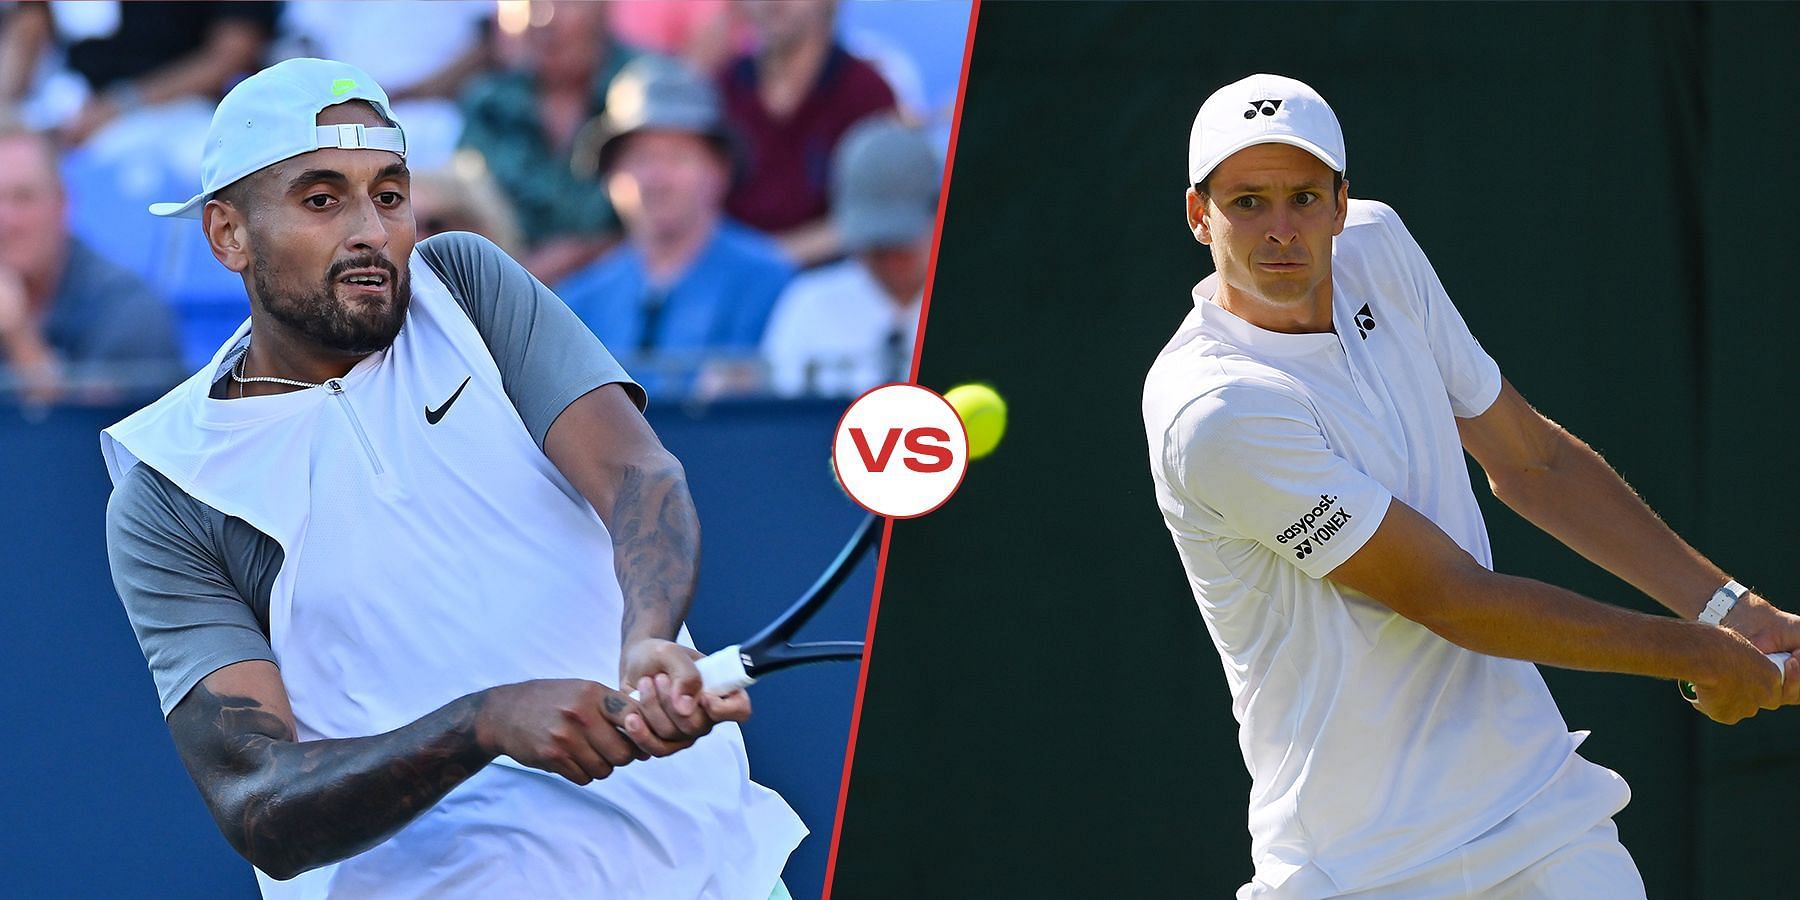 Kyrgios will take on Hurkacz in the Canadian Open quarterfinals